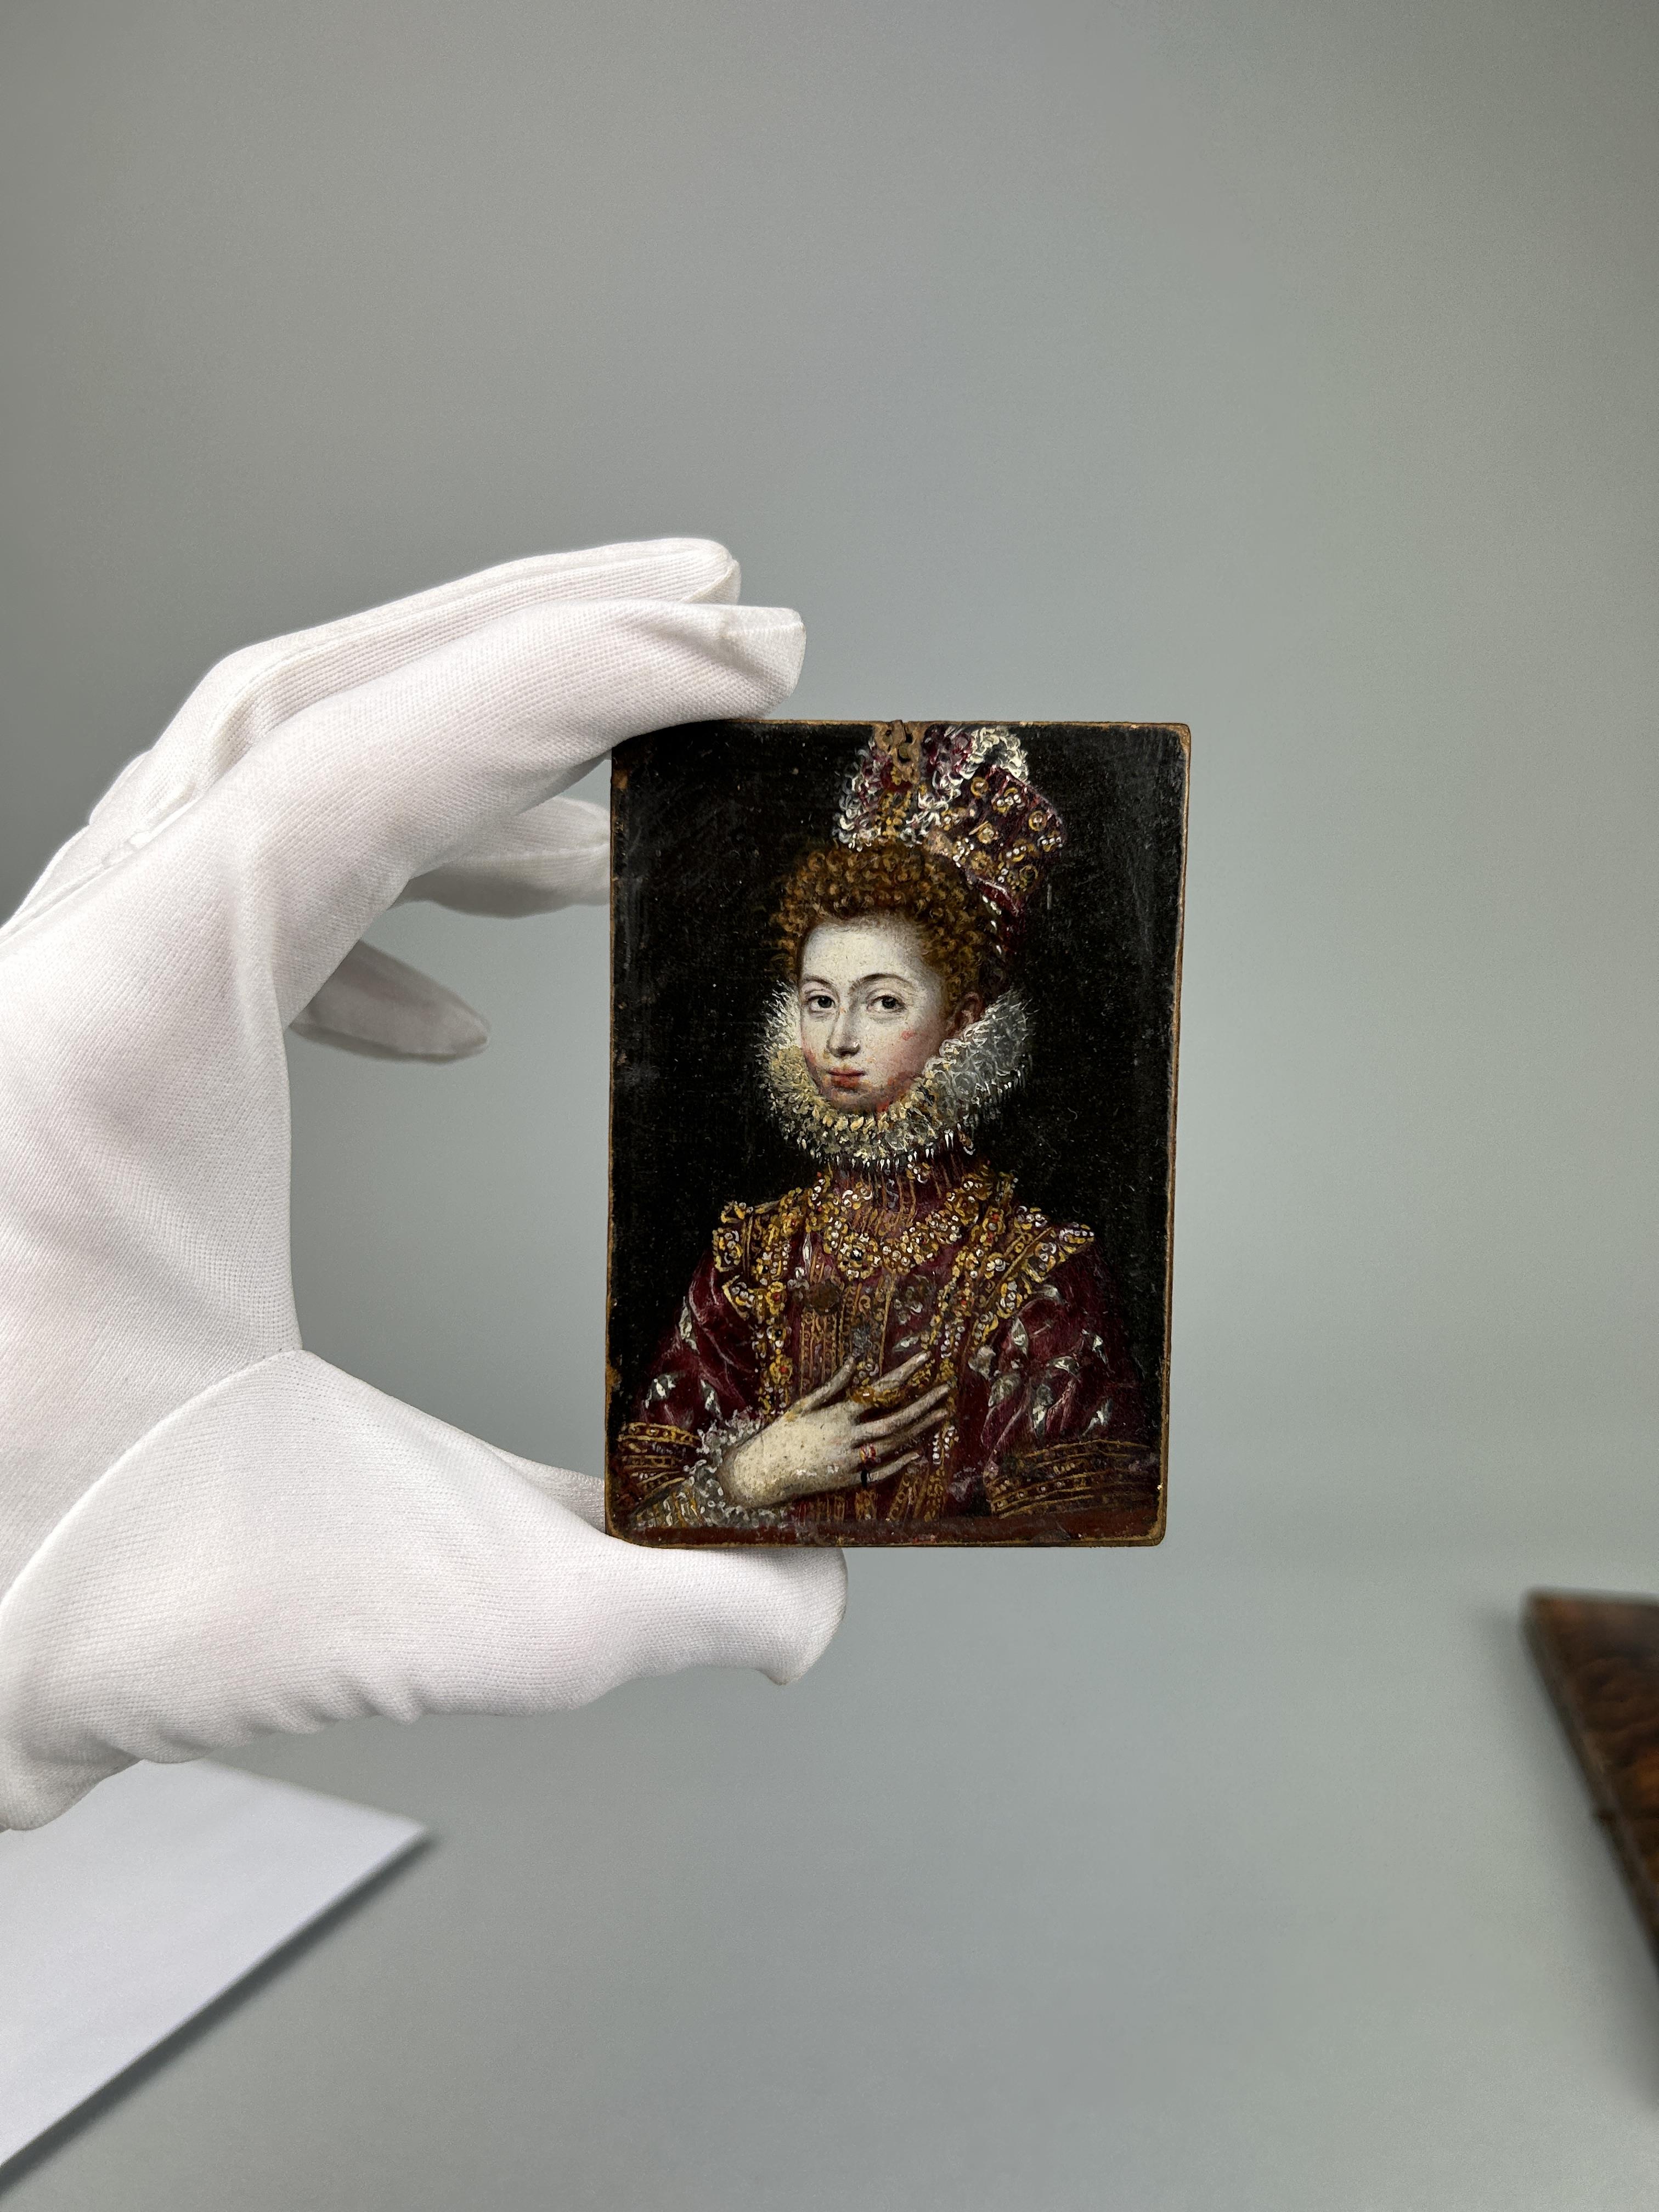 EARLY 17TH CENTURY SPANISH SCHOOL: MINIATURE PORTRAIT PAINTING PROBABLY DEPICTING ISABELLA CLARA - Image 3 of 5